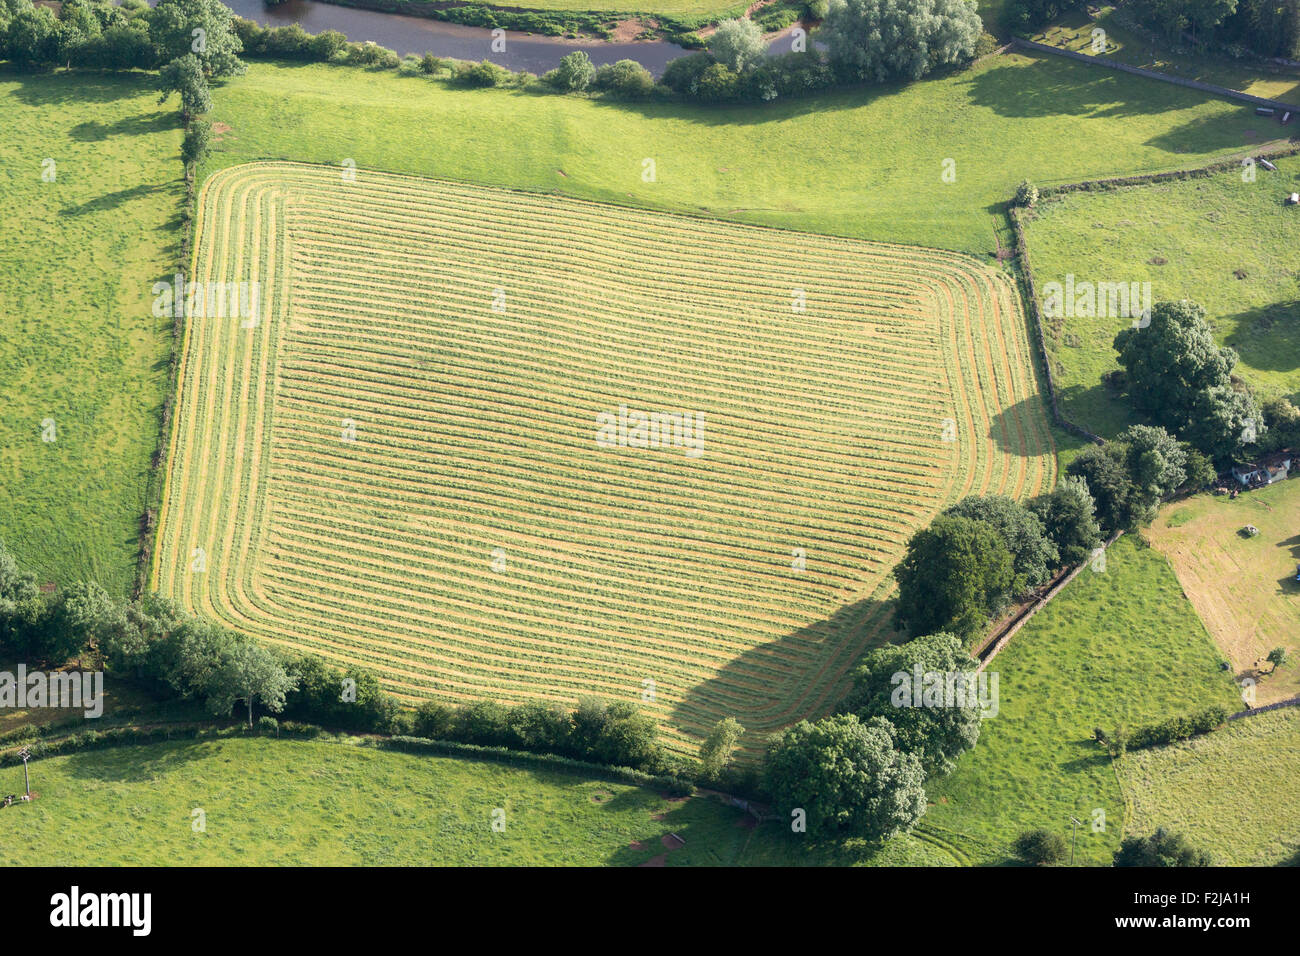 Aerial field of grass mowed for silage in Cumbrian countryside, UK. Stock Photo